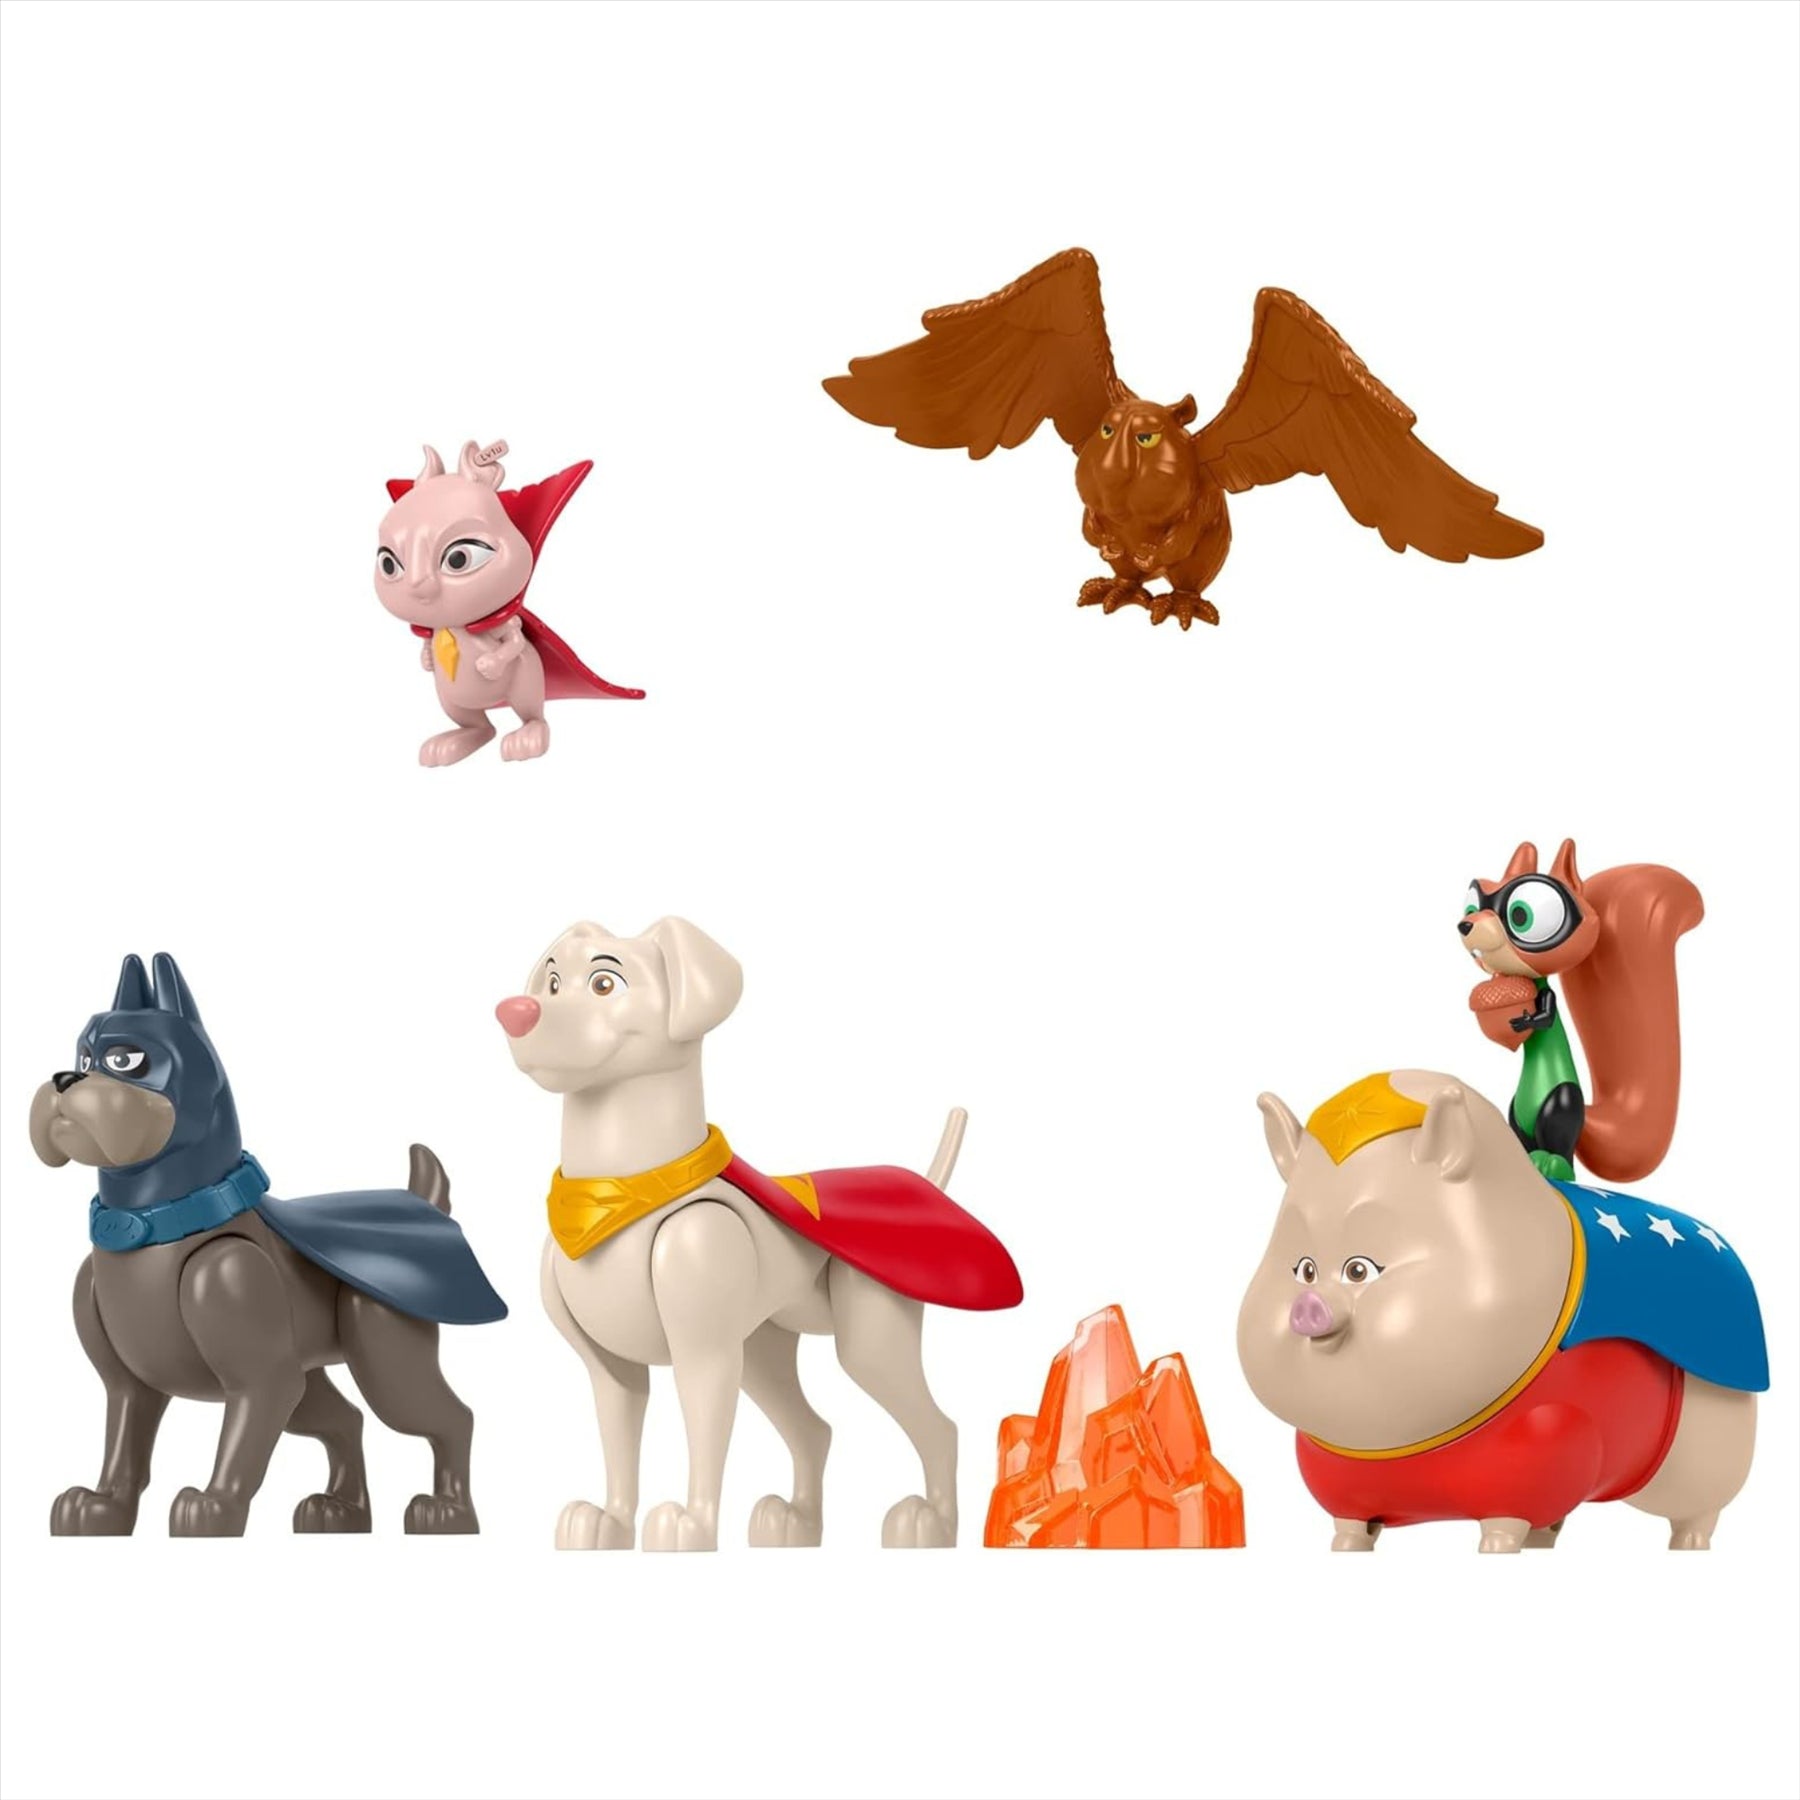 Fisher-Price Superpets Miniature Toy Action Figure Multi-Pack - Set of 6